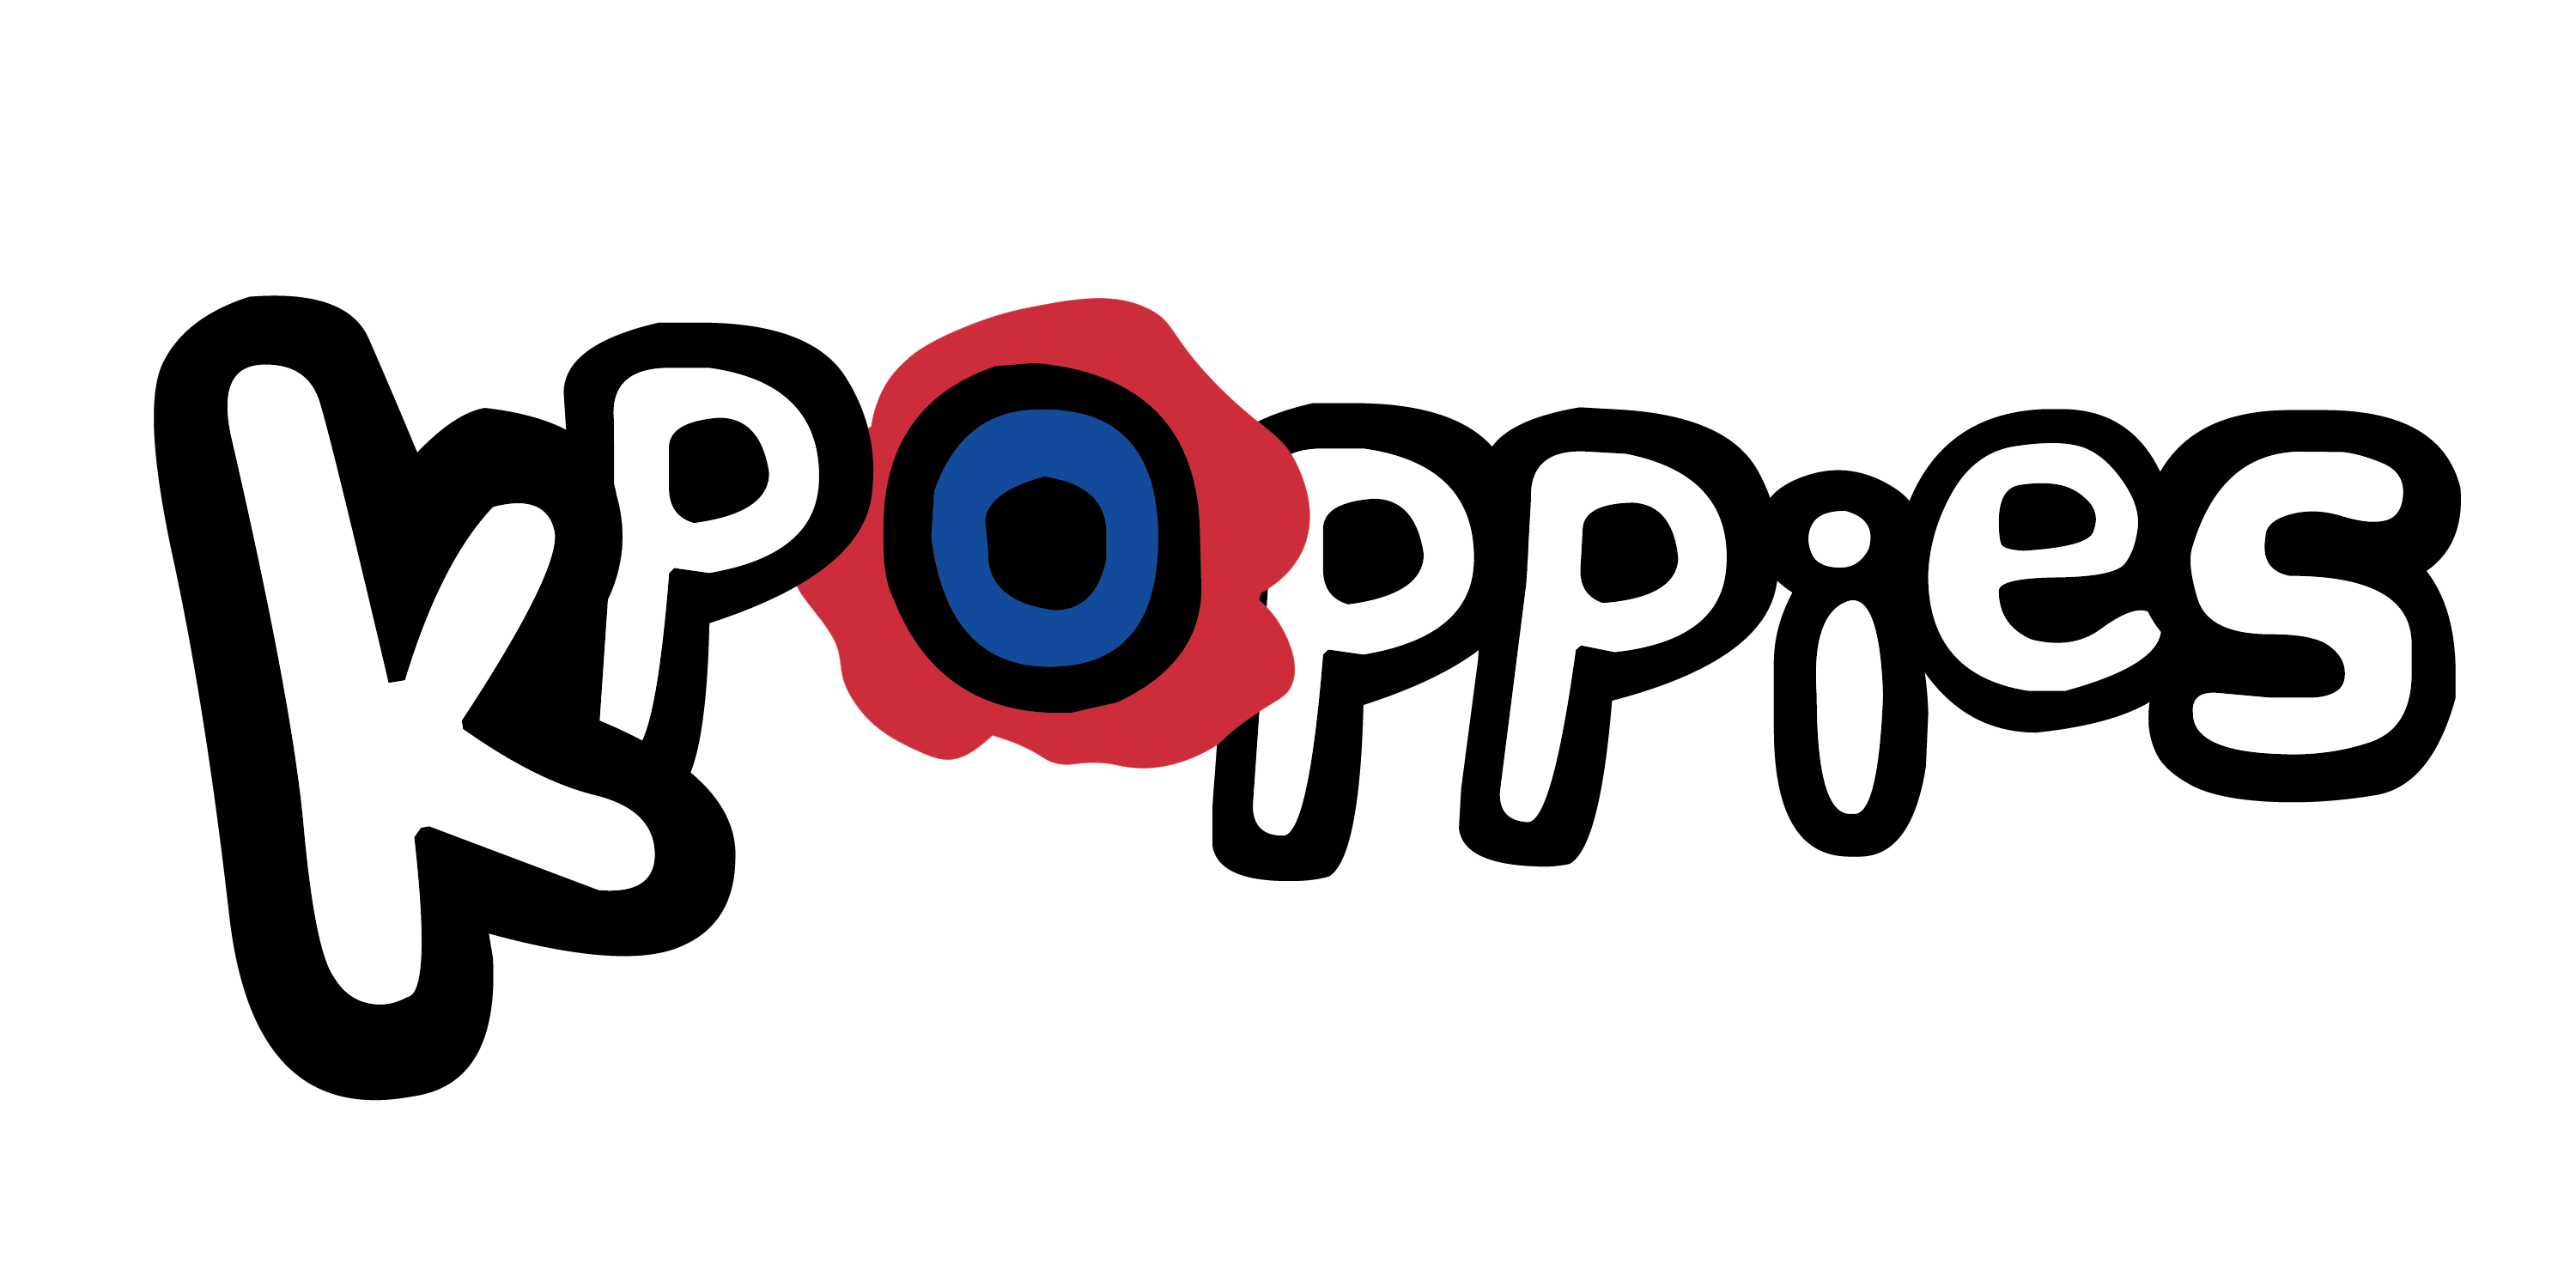 Kpoppies goes live!